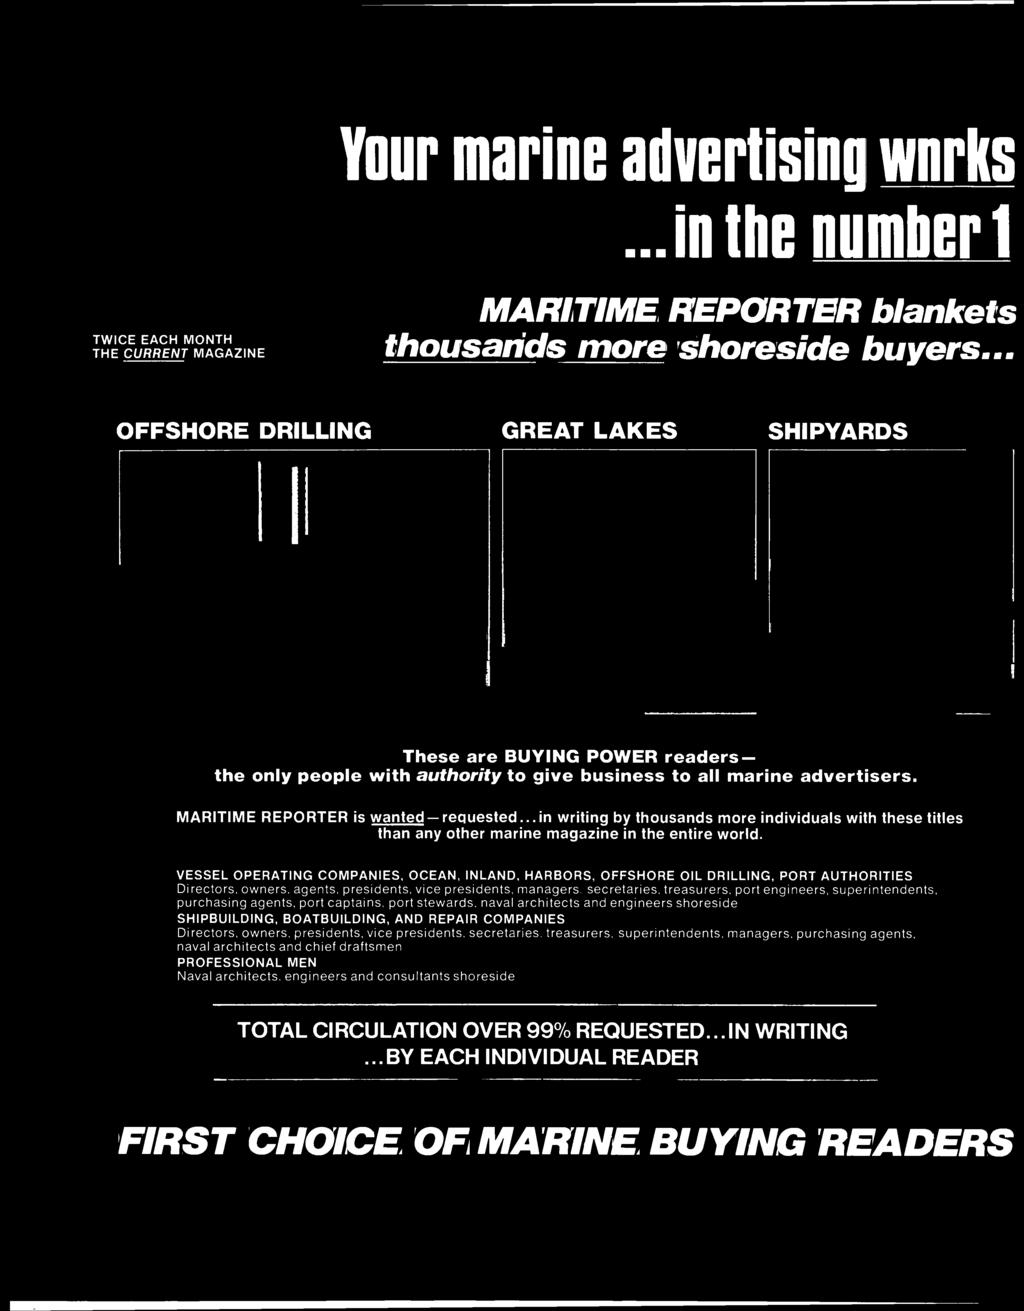 Your marine advertising wnrks...in the number 1 TWICE EACH MONTH THE CURRENT MAGAZINE MARITIME REPORTER blankets thousands more shoreside buyers.